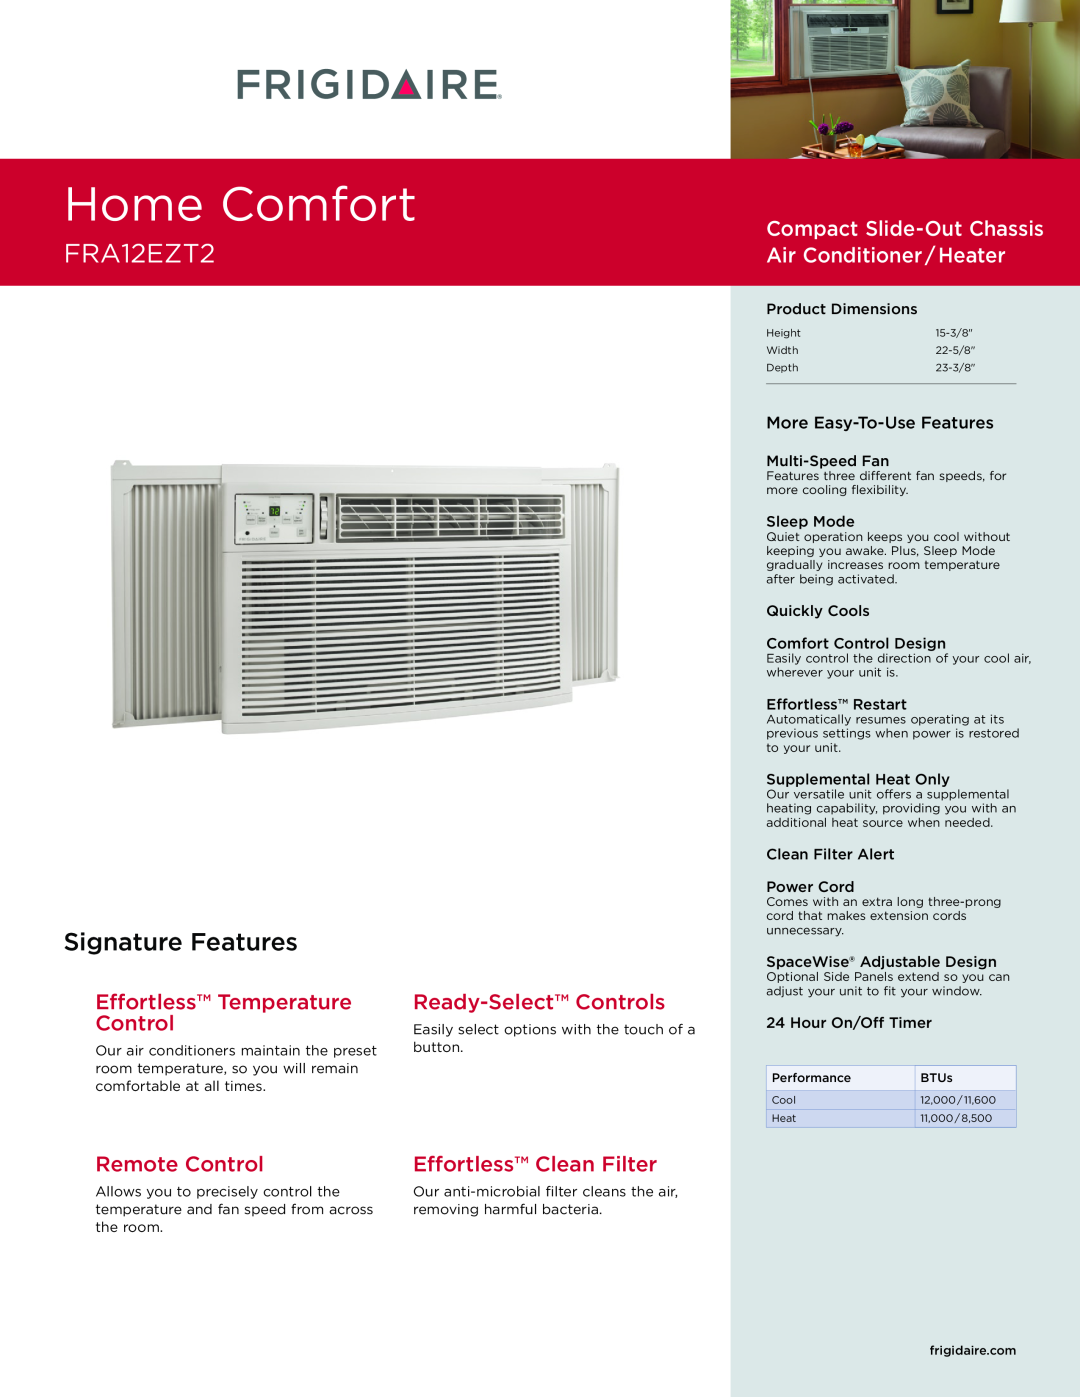 Frigidaire FRA12EZT2 dimensions Home Comfort, Signature Features, Compact Slide-Out Chassis Air Conditioner / Heater 